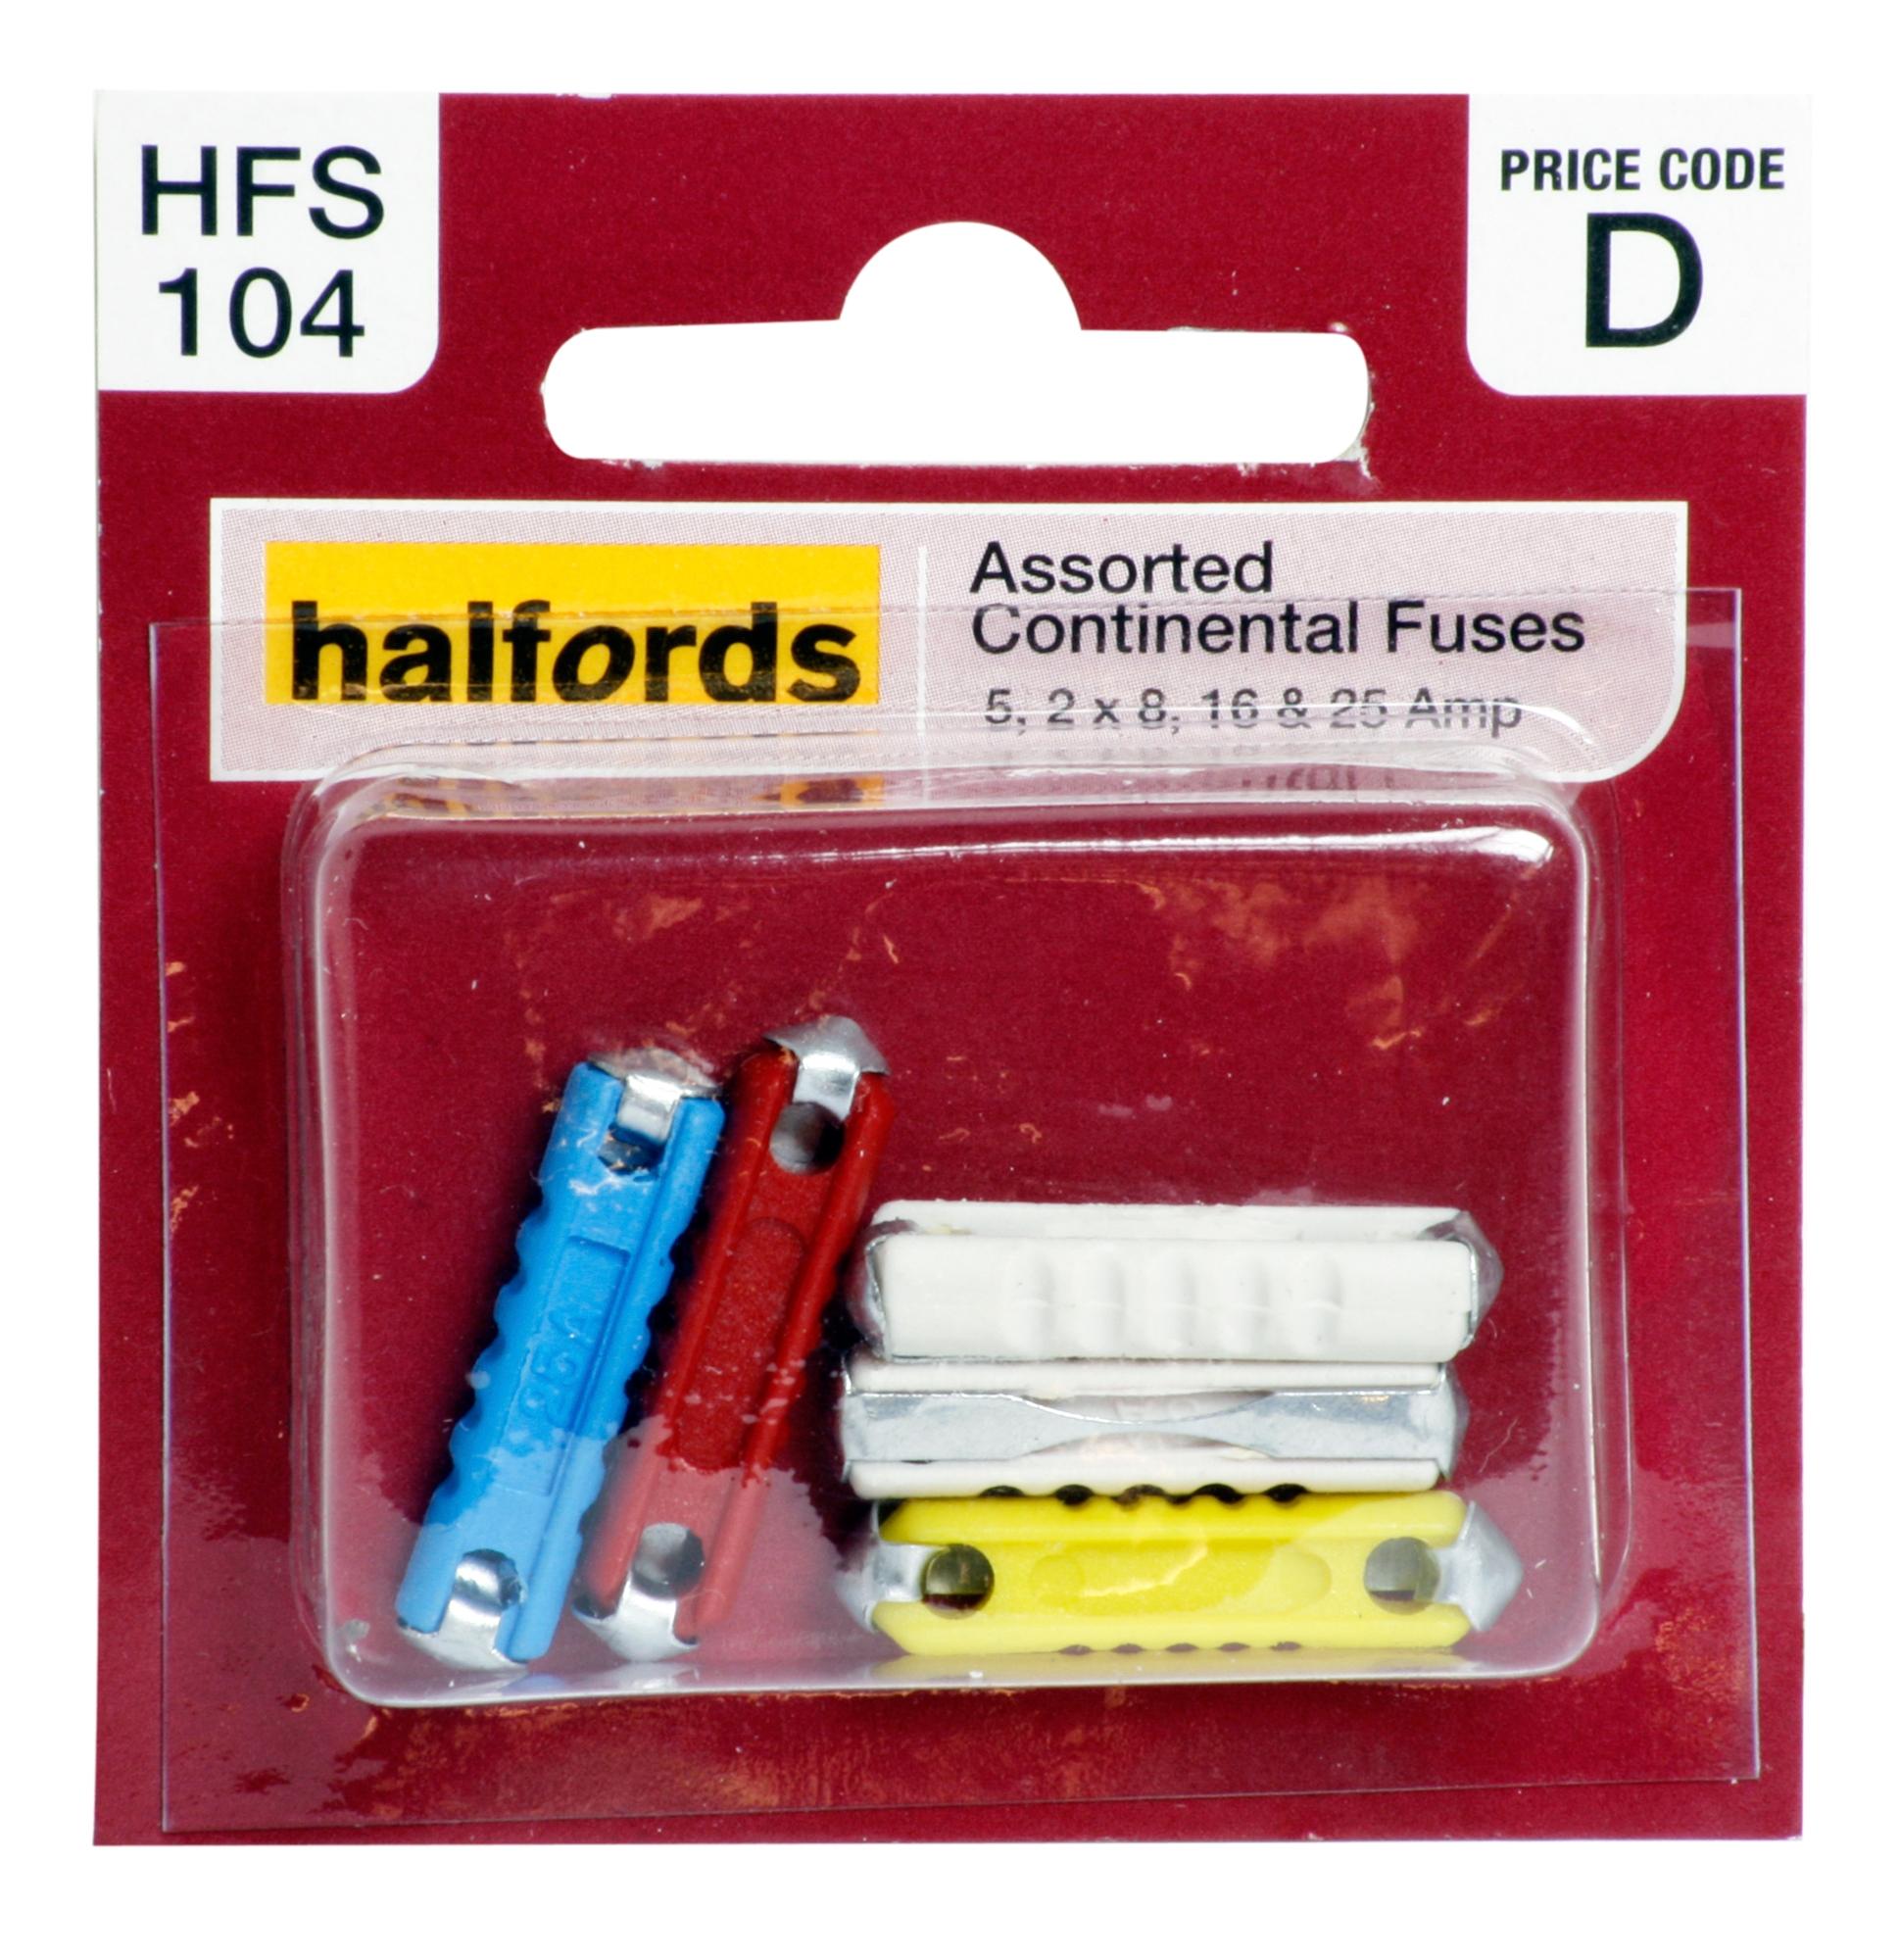 Halfords Assorted Continental Fuses 5/8/16/25 Amp (Hfs104)